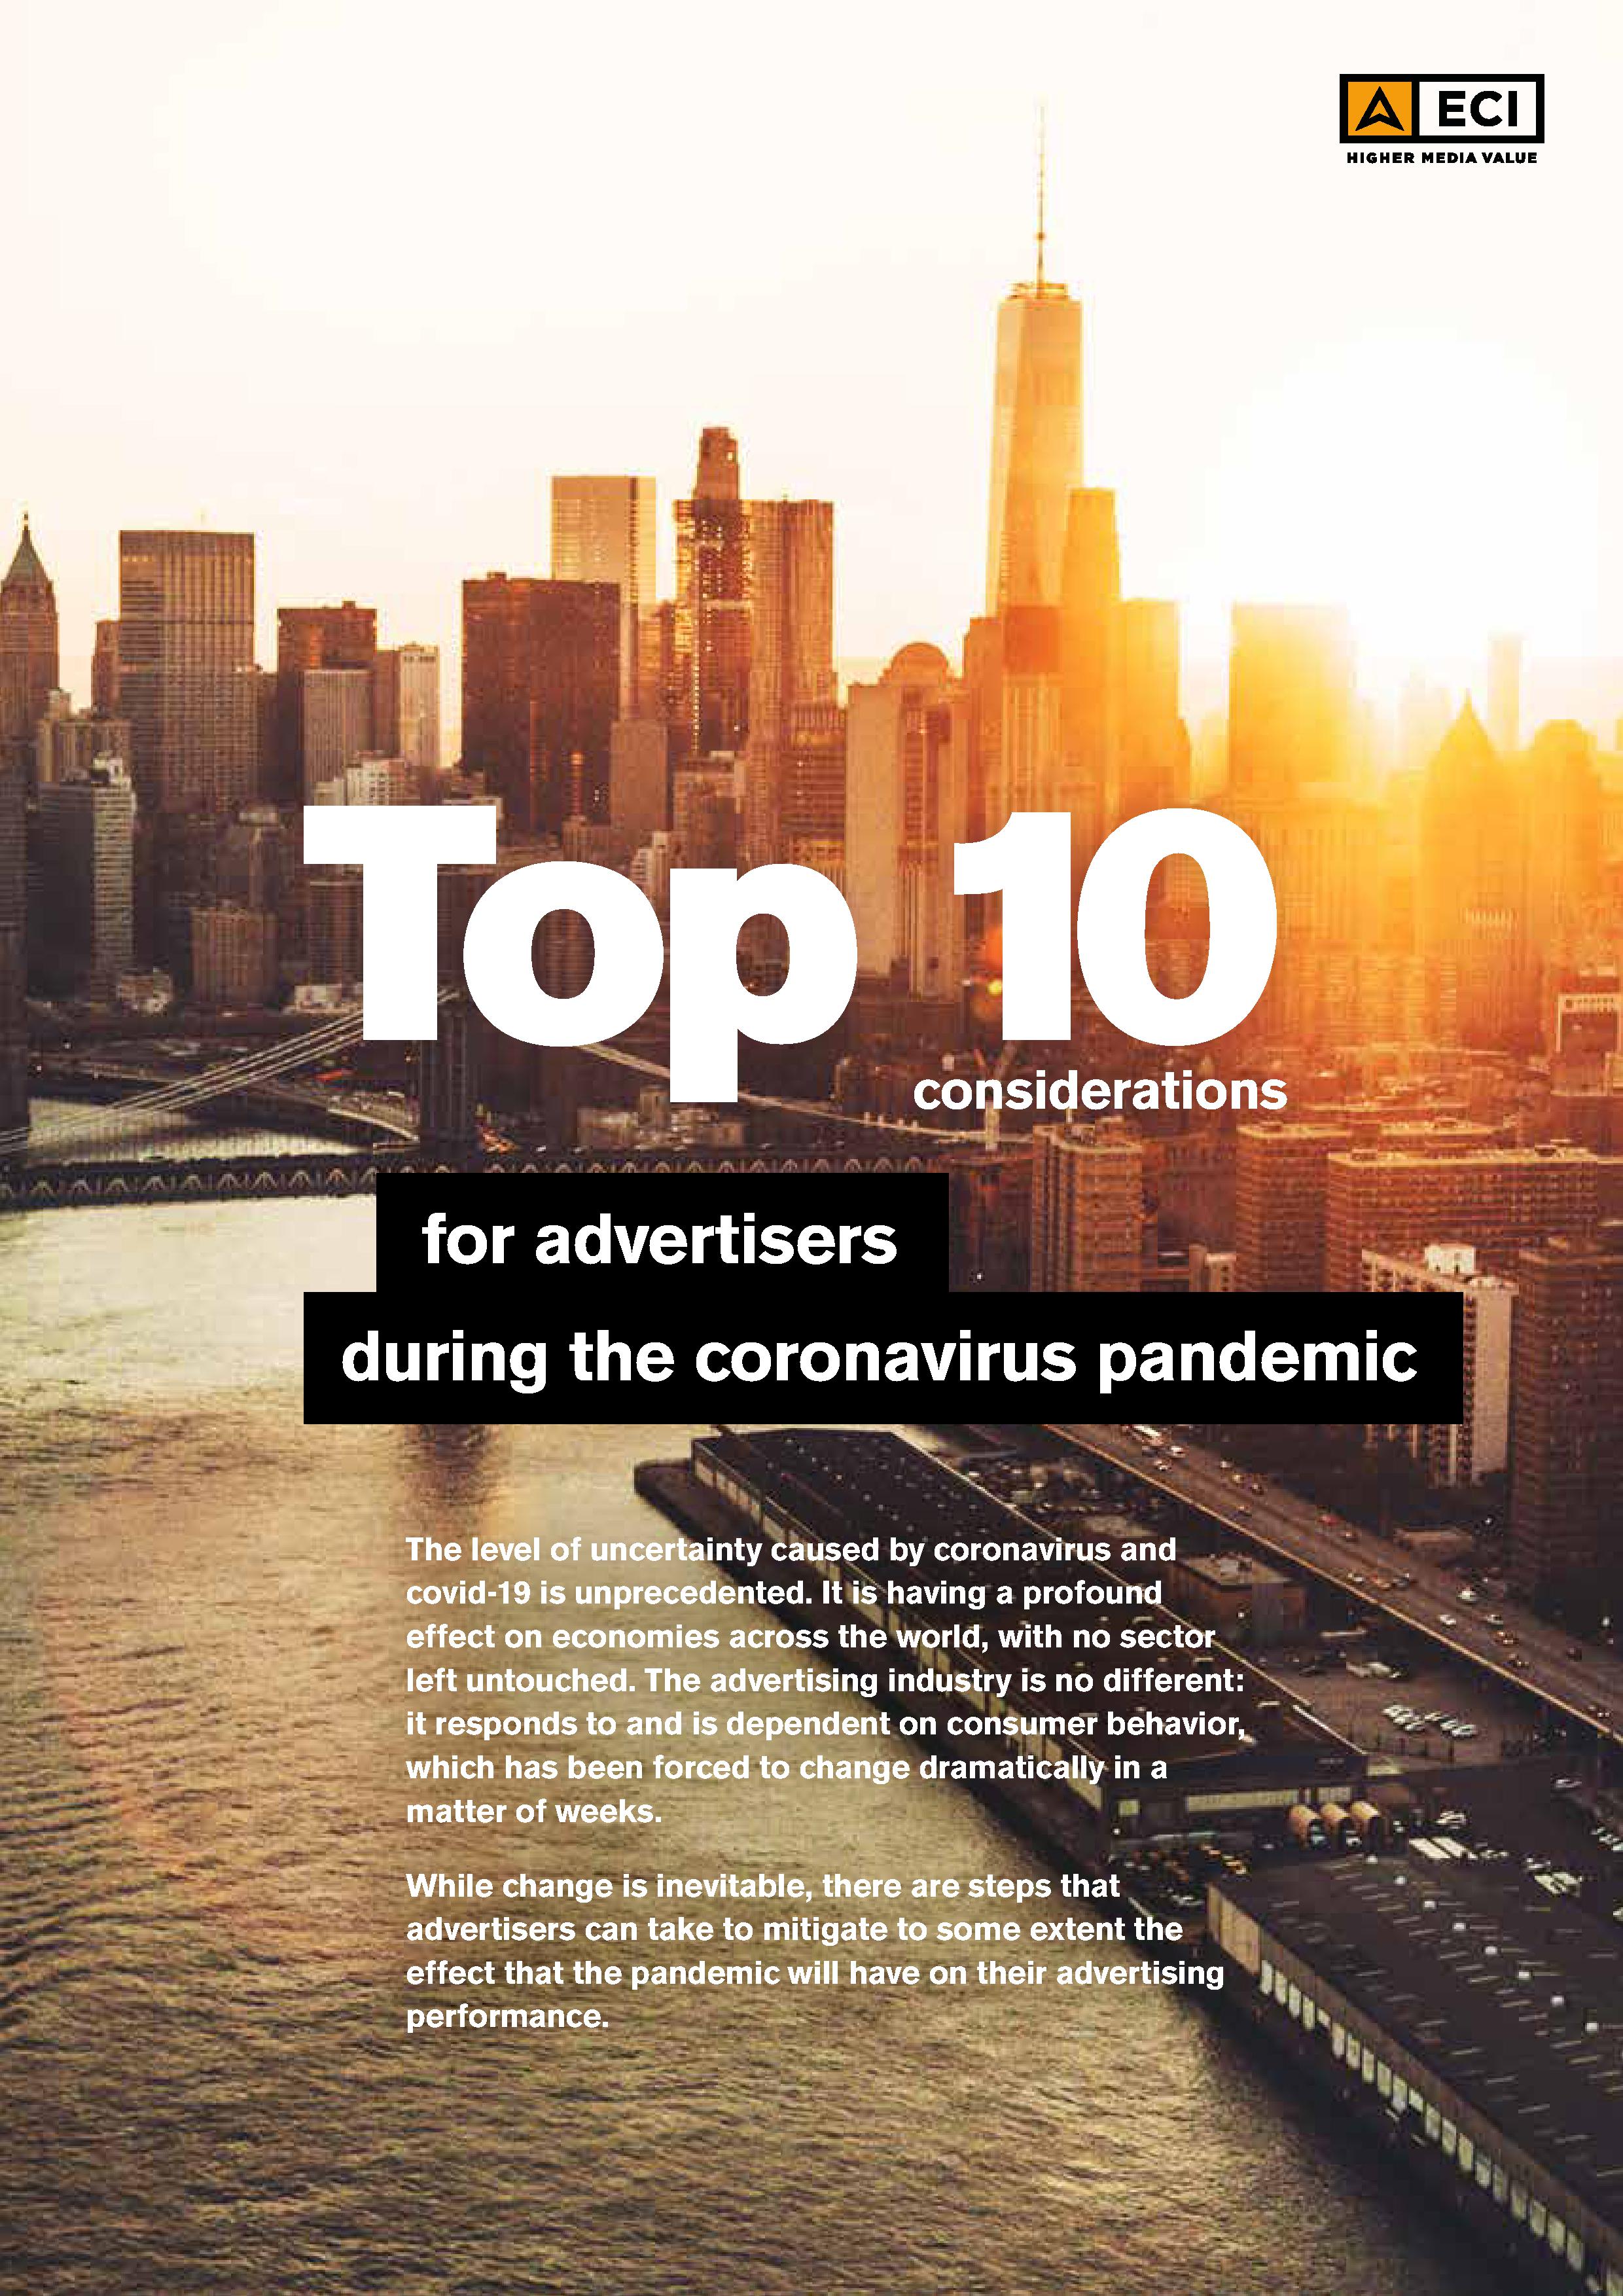 Top 10 considerations for advertisers during the coronavirus pandemic